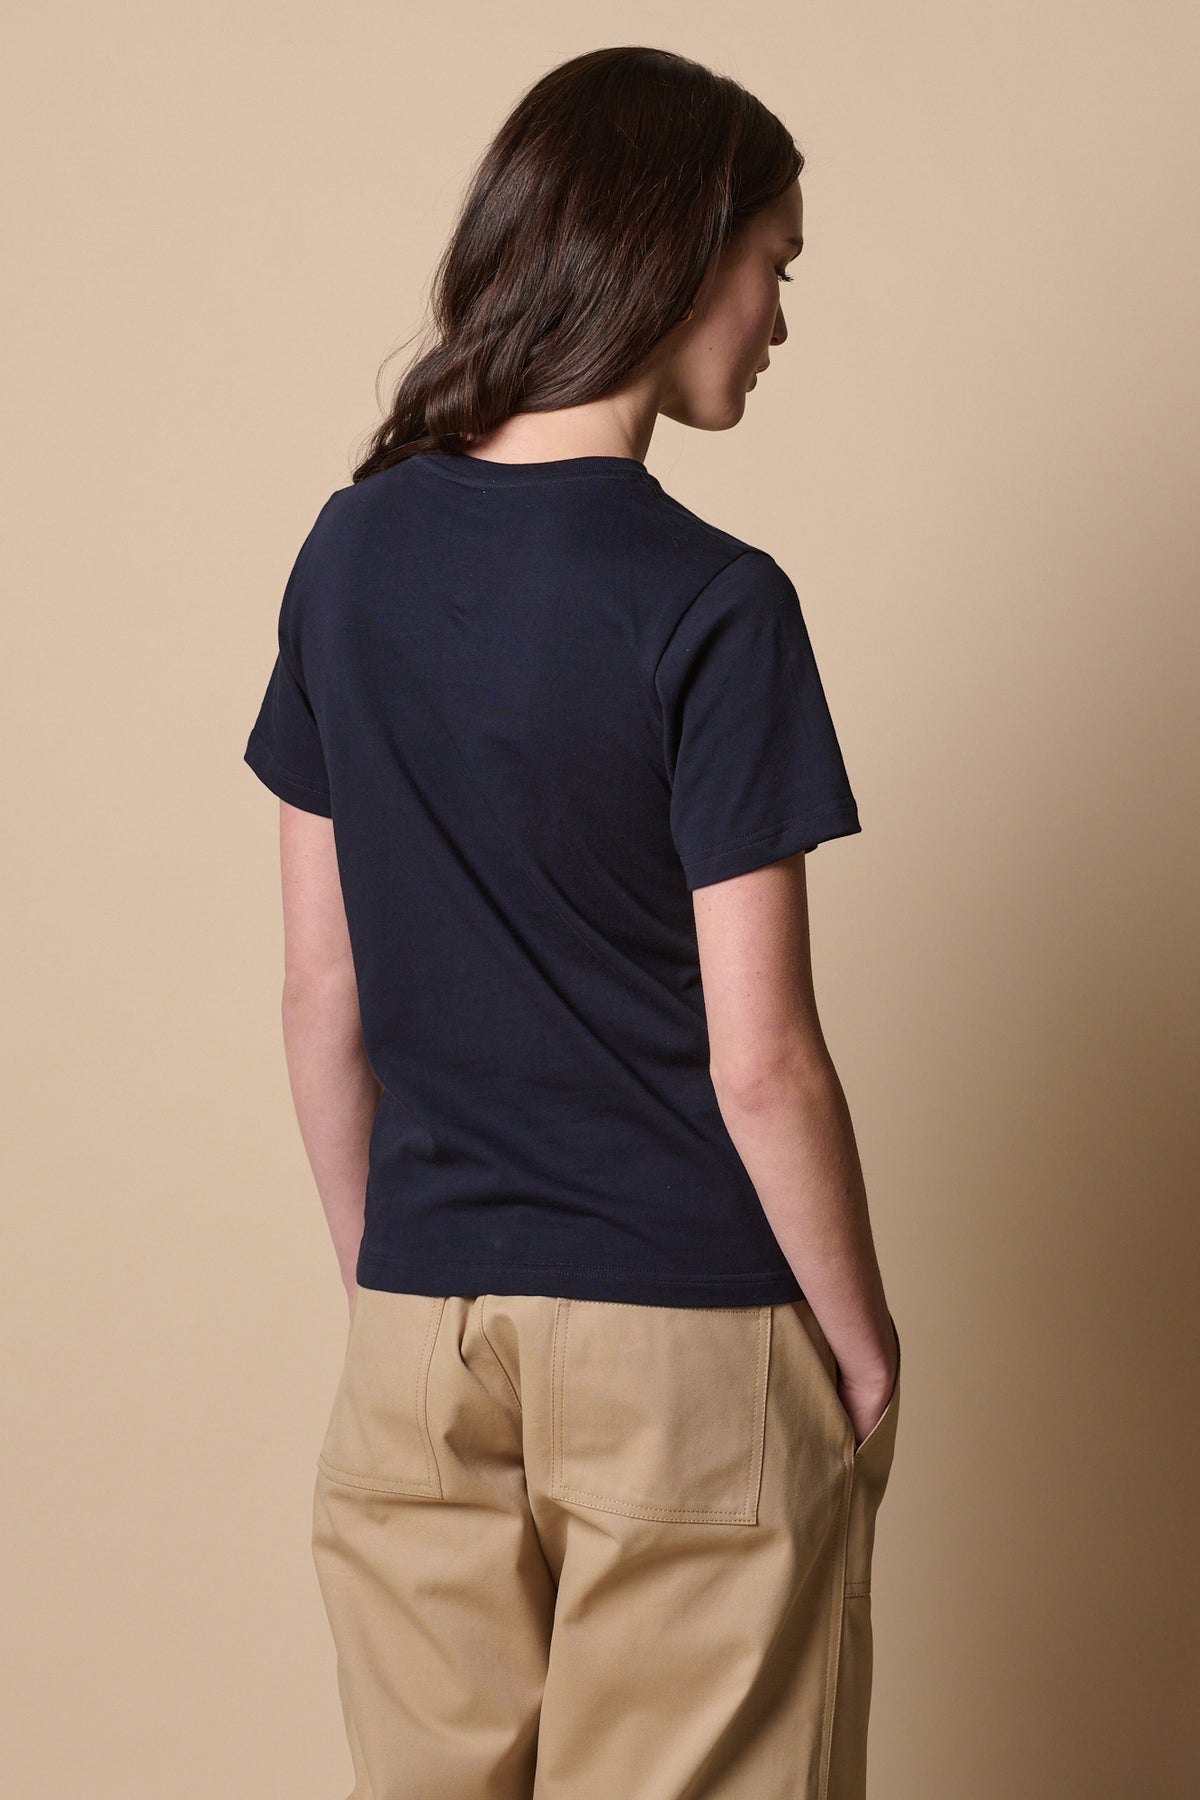 
            Back of female wearing short sleeve t shirt in navy